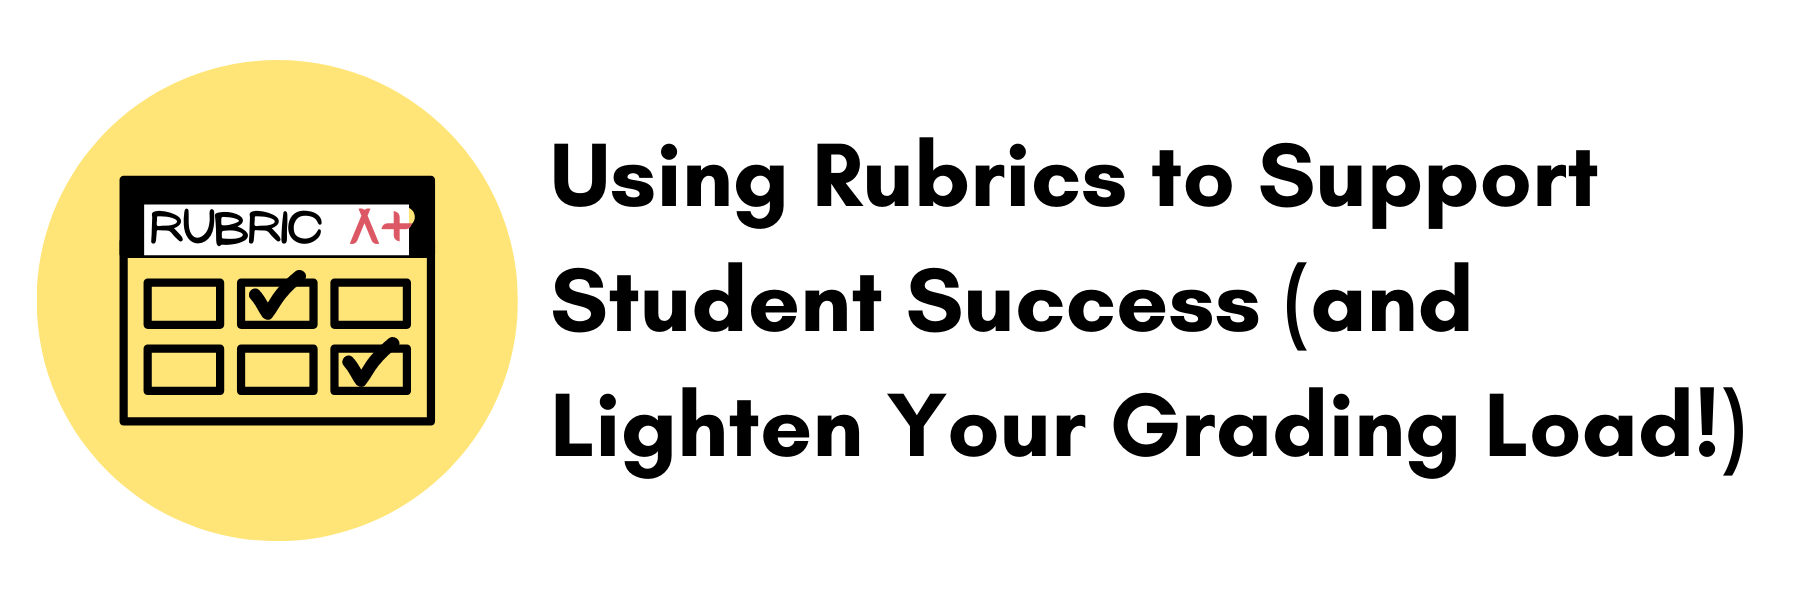 Using Rubrics to Support Student Success (and Lighten Your Grading Load!)